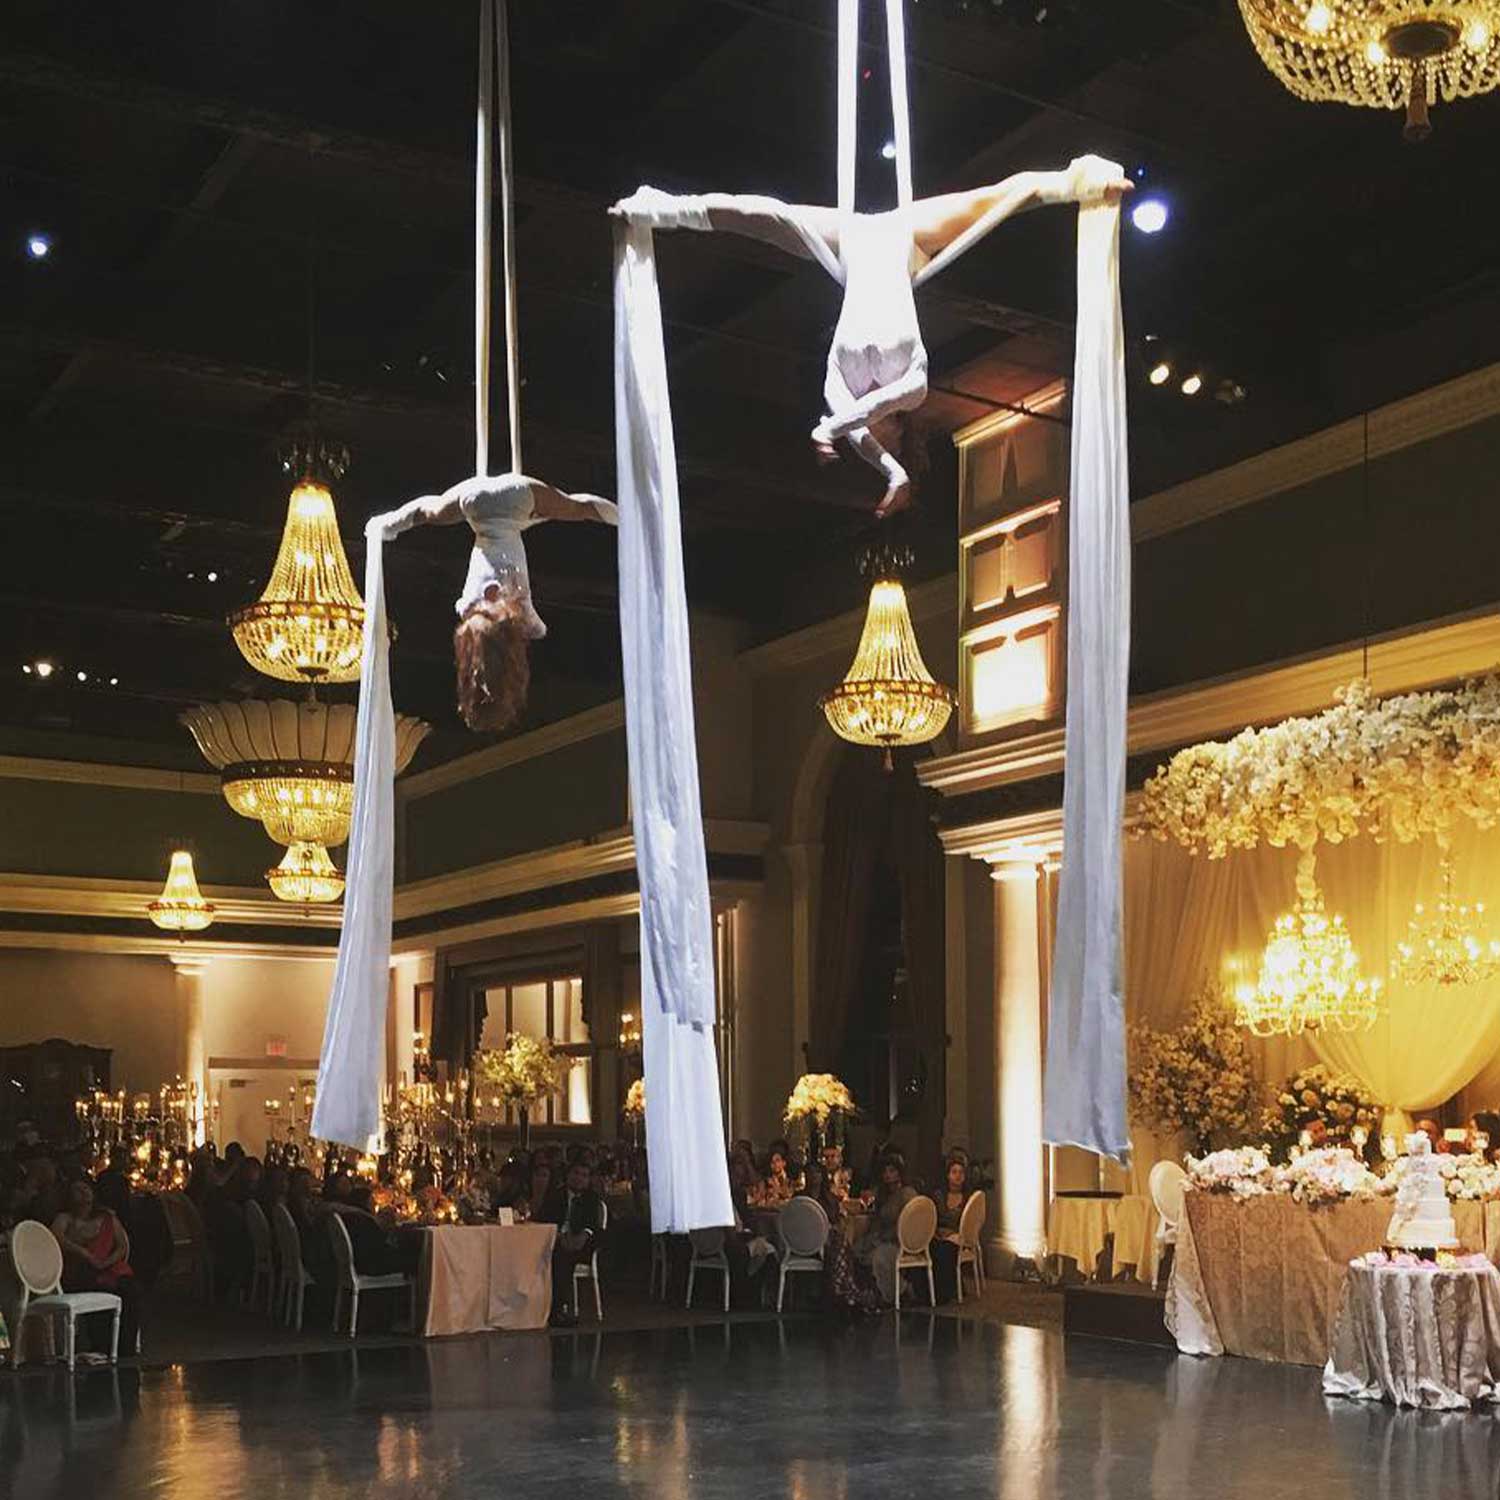 toronto circus, circus, events, performers, toronto events, event space